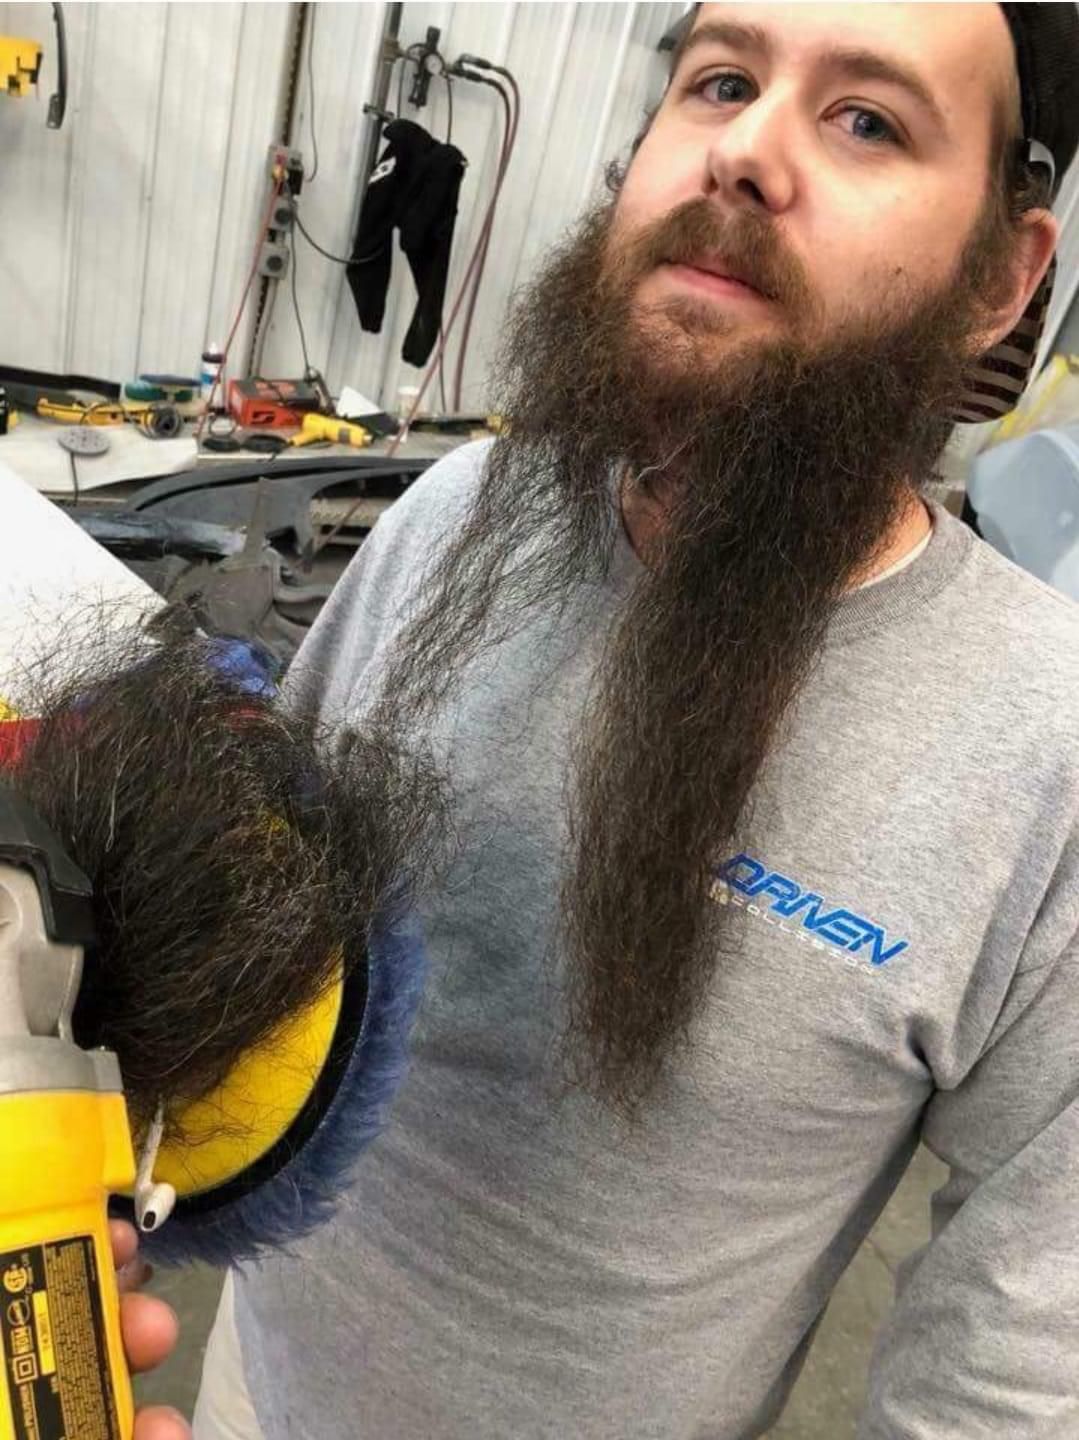 Long beards and angle grinders don’t mix